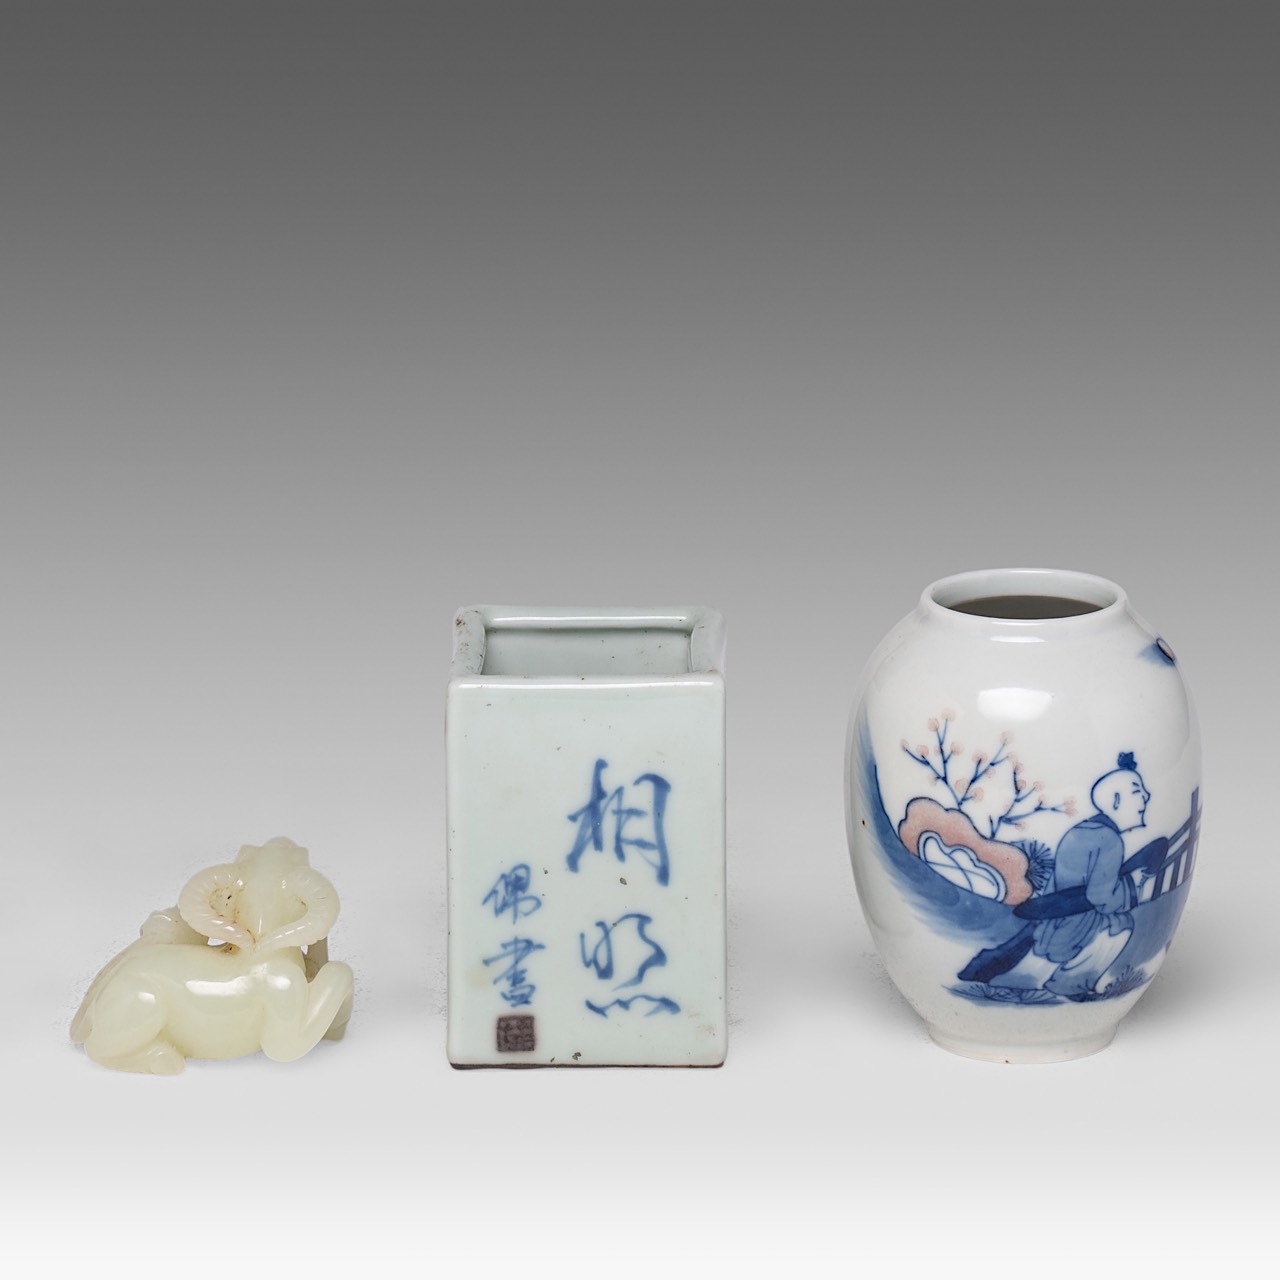 A collection of four Chinese scholar's objects, incl. a brush pot with inscriptions, late 18thC - ad - Image 4 of 29